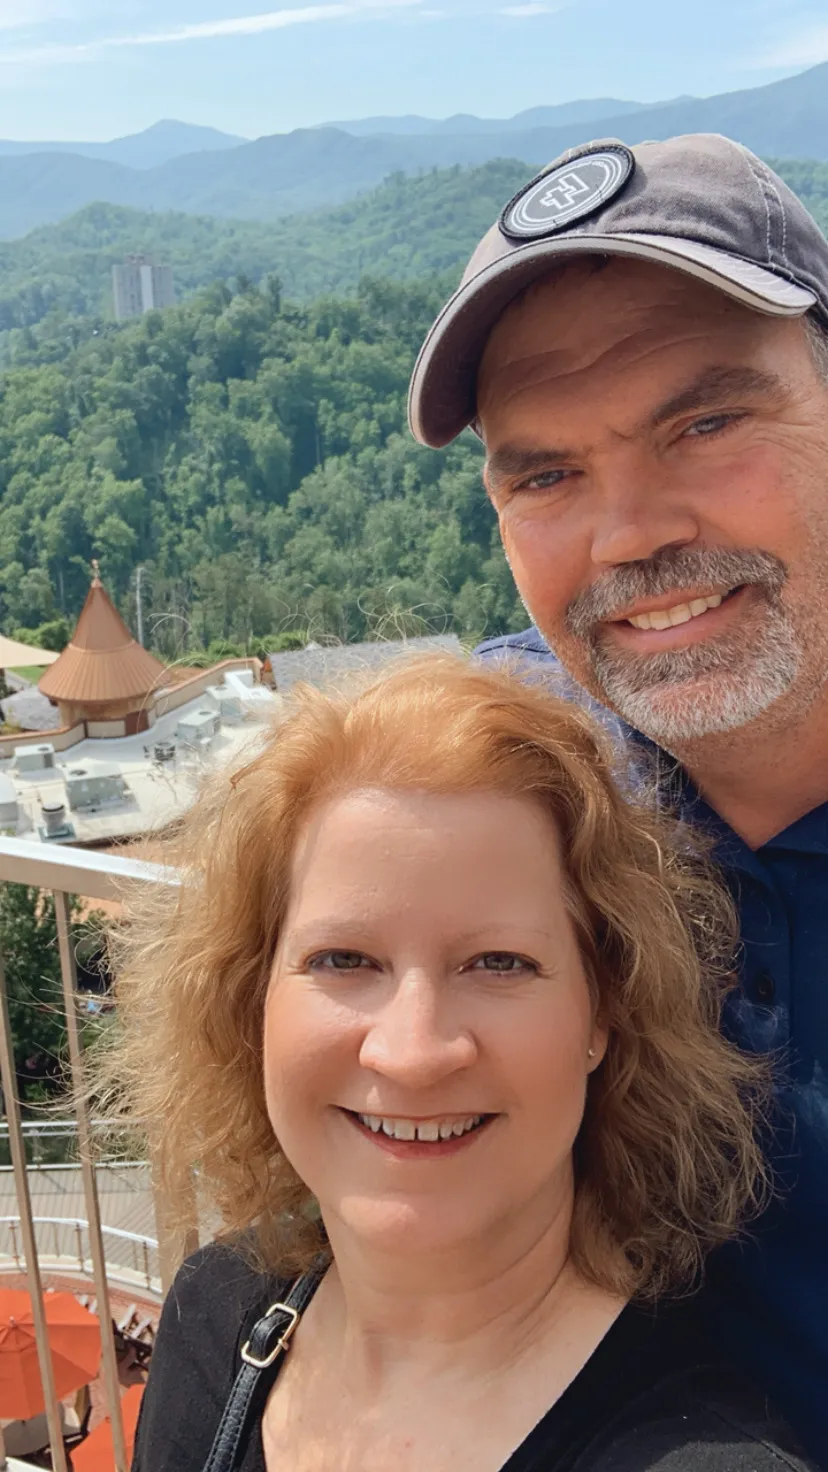 Couple selfie overlooking a view of Tennessee